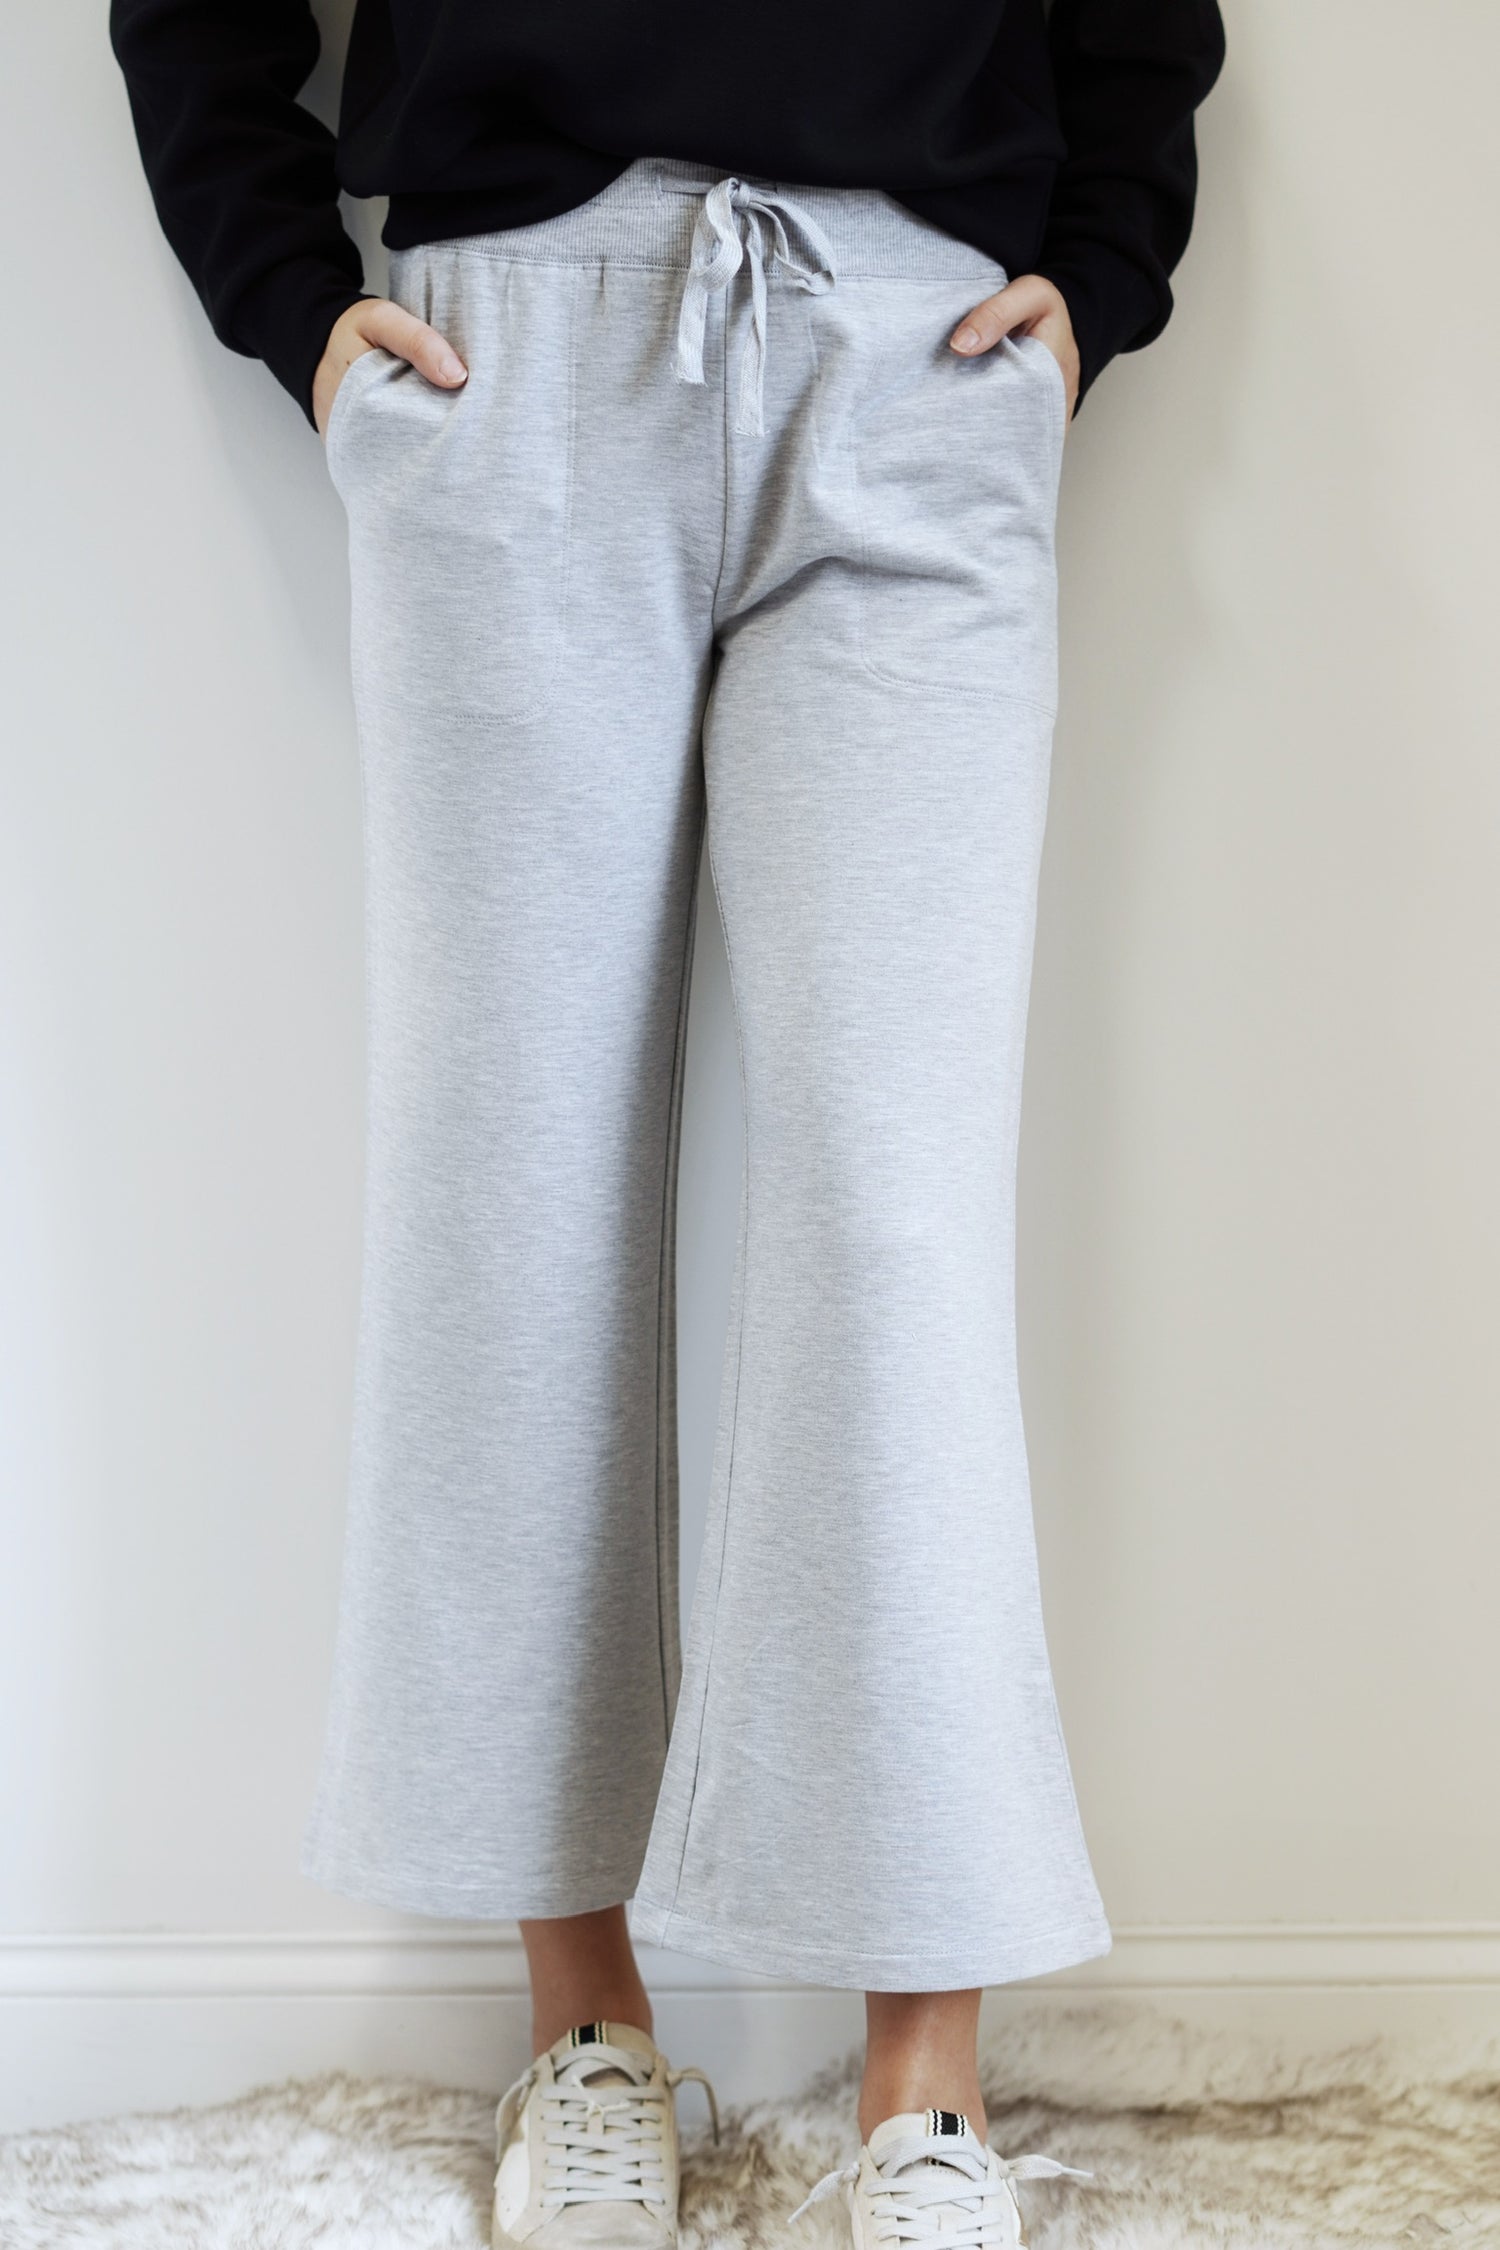 Jet Set Modal Fleece Pant Relaxed Fit Modal Fleece: 97% Modal, 3% Spandex Wide Leg Colors:  Grey Flat drawcord Stitch detail pockets Wash cold, dry flat